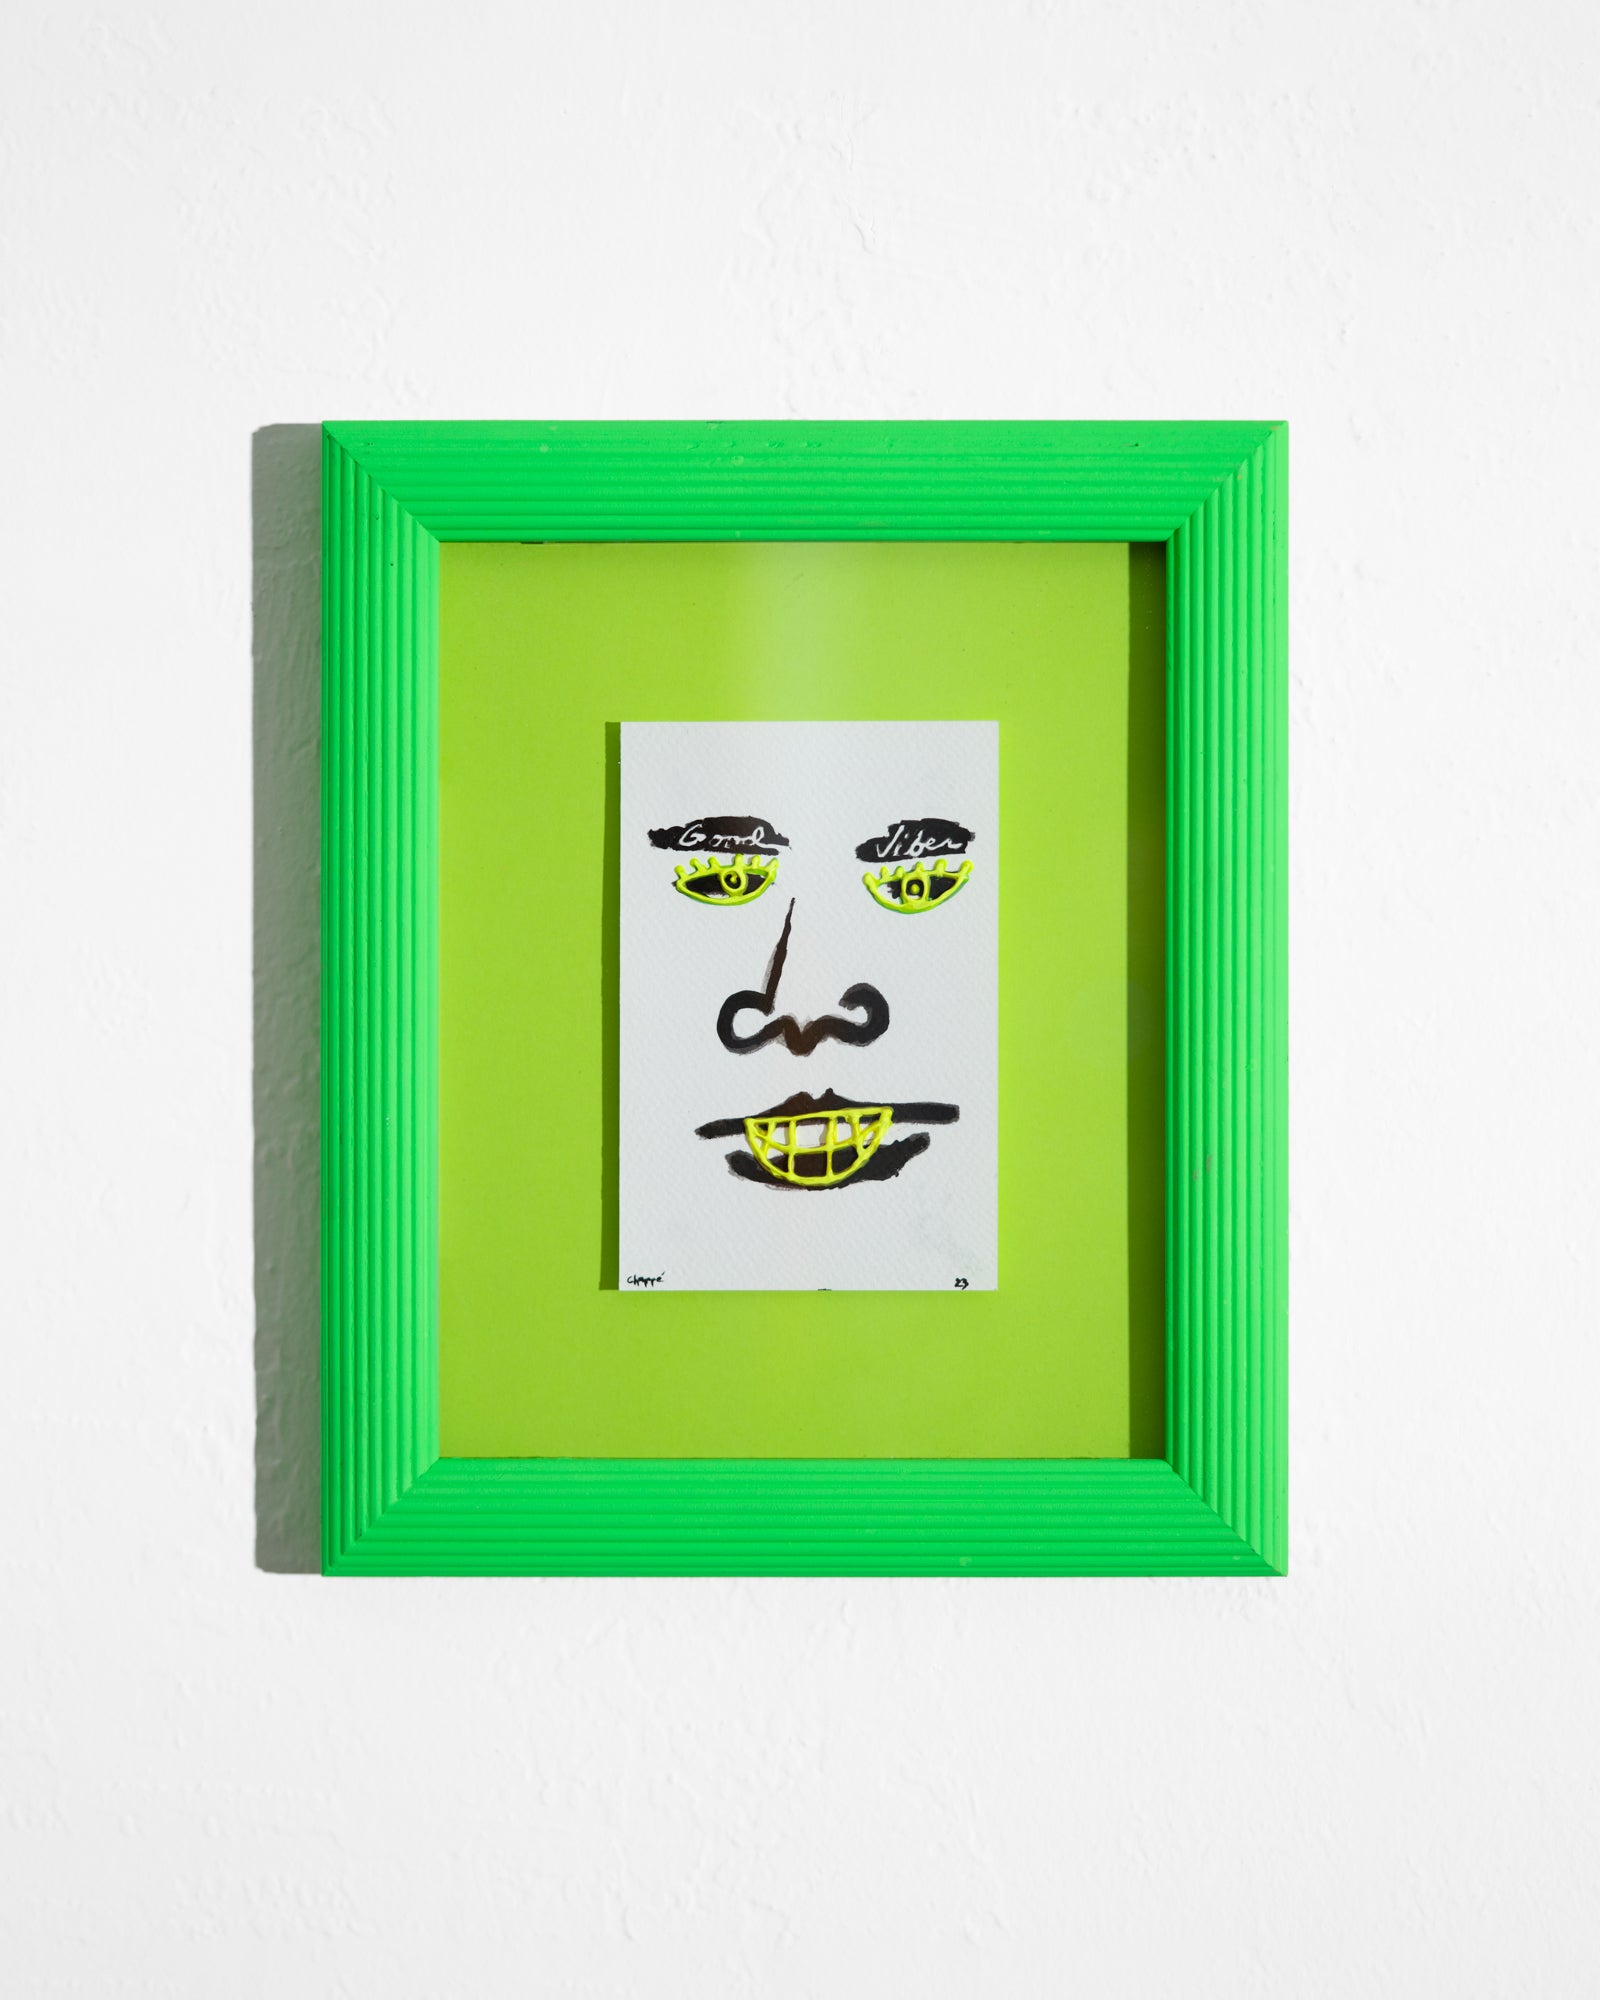 Untitled - Good vibes face - Green